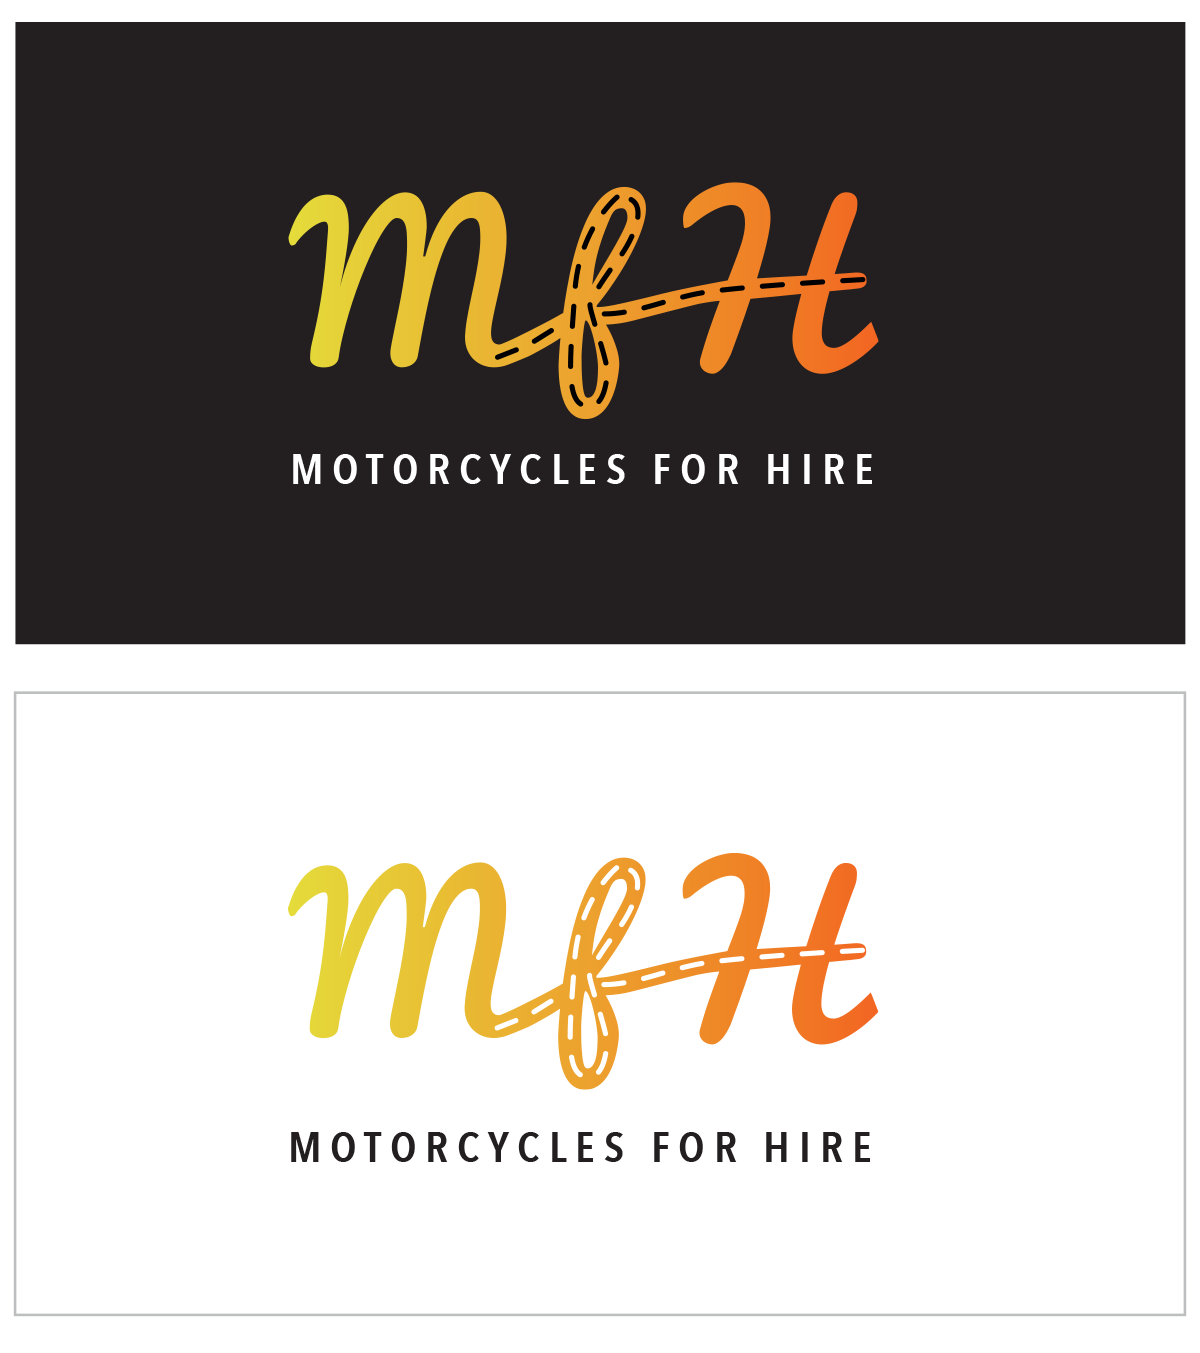 Motorcycles For Hire logo